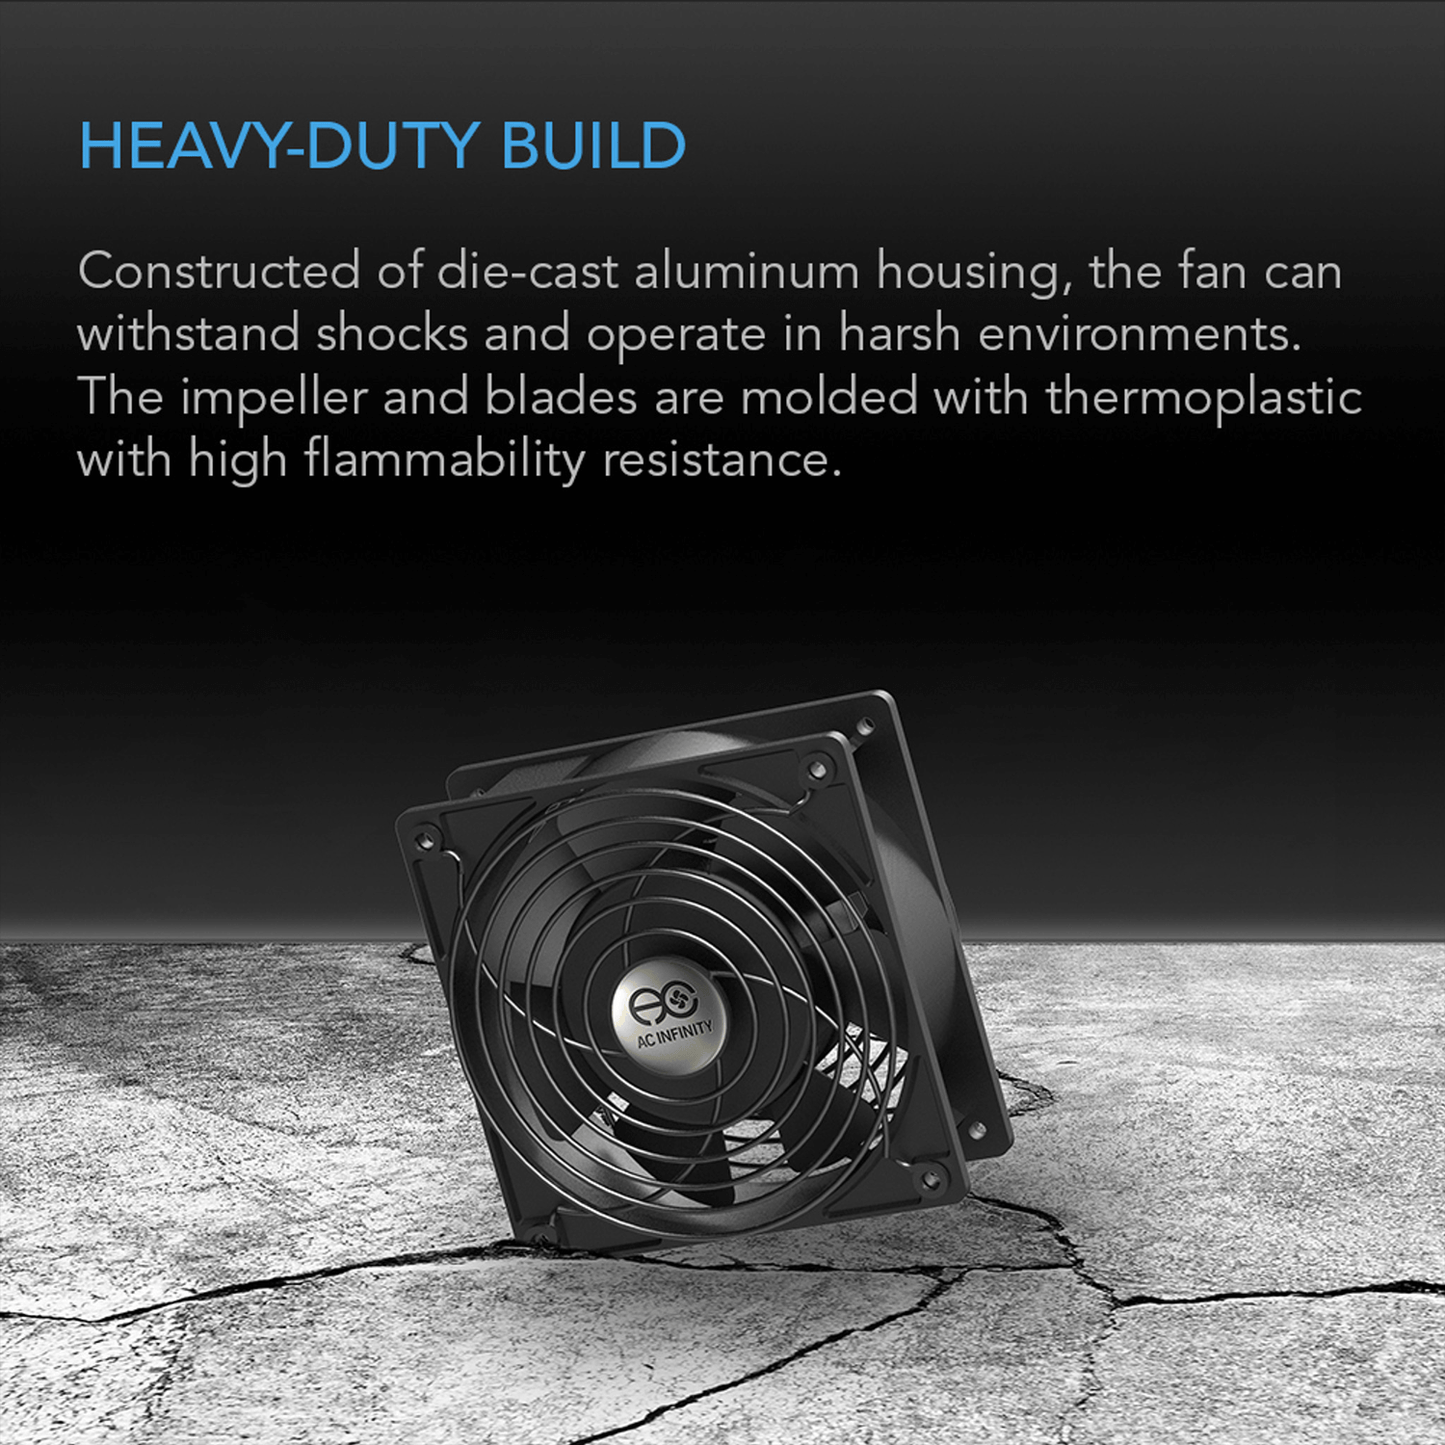 AC Infinity AXIAL 9225, Muffin 120V AC Cooling Fan, 92mm x 92mm x 25mm HS9225A-X Climate Control 854759004228